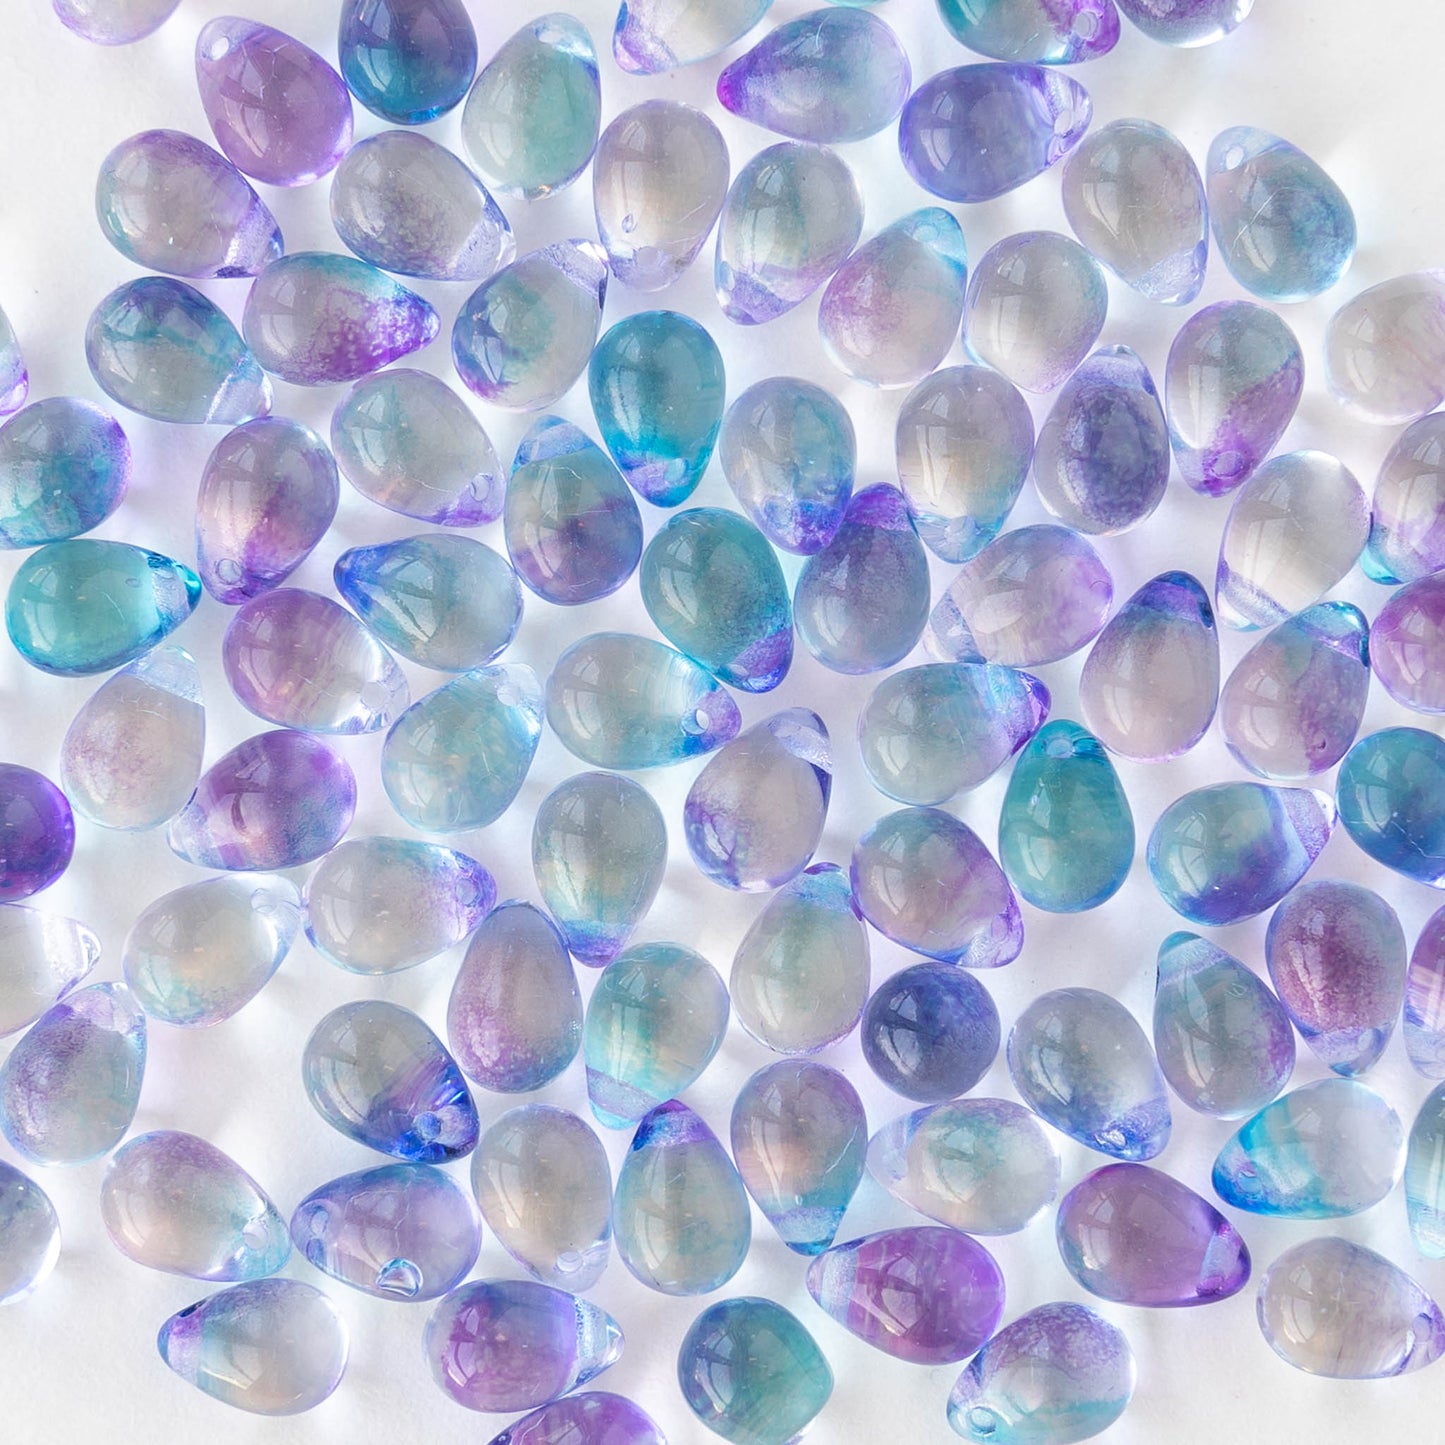 Load image into Gallery viewer, 5x7mm Glass Teardrop Beads - Lavender Blue Mix - 75 beads
